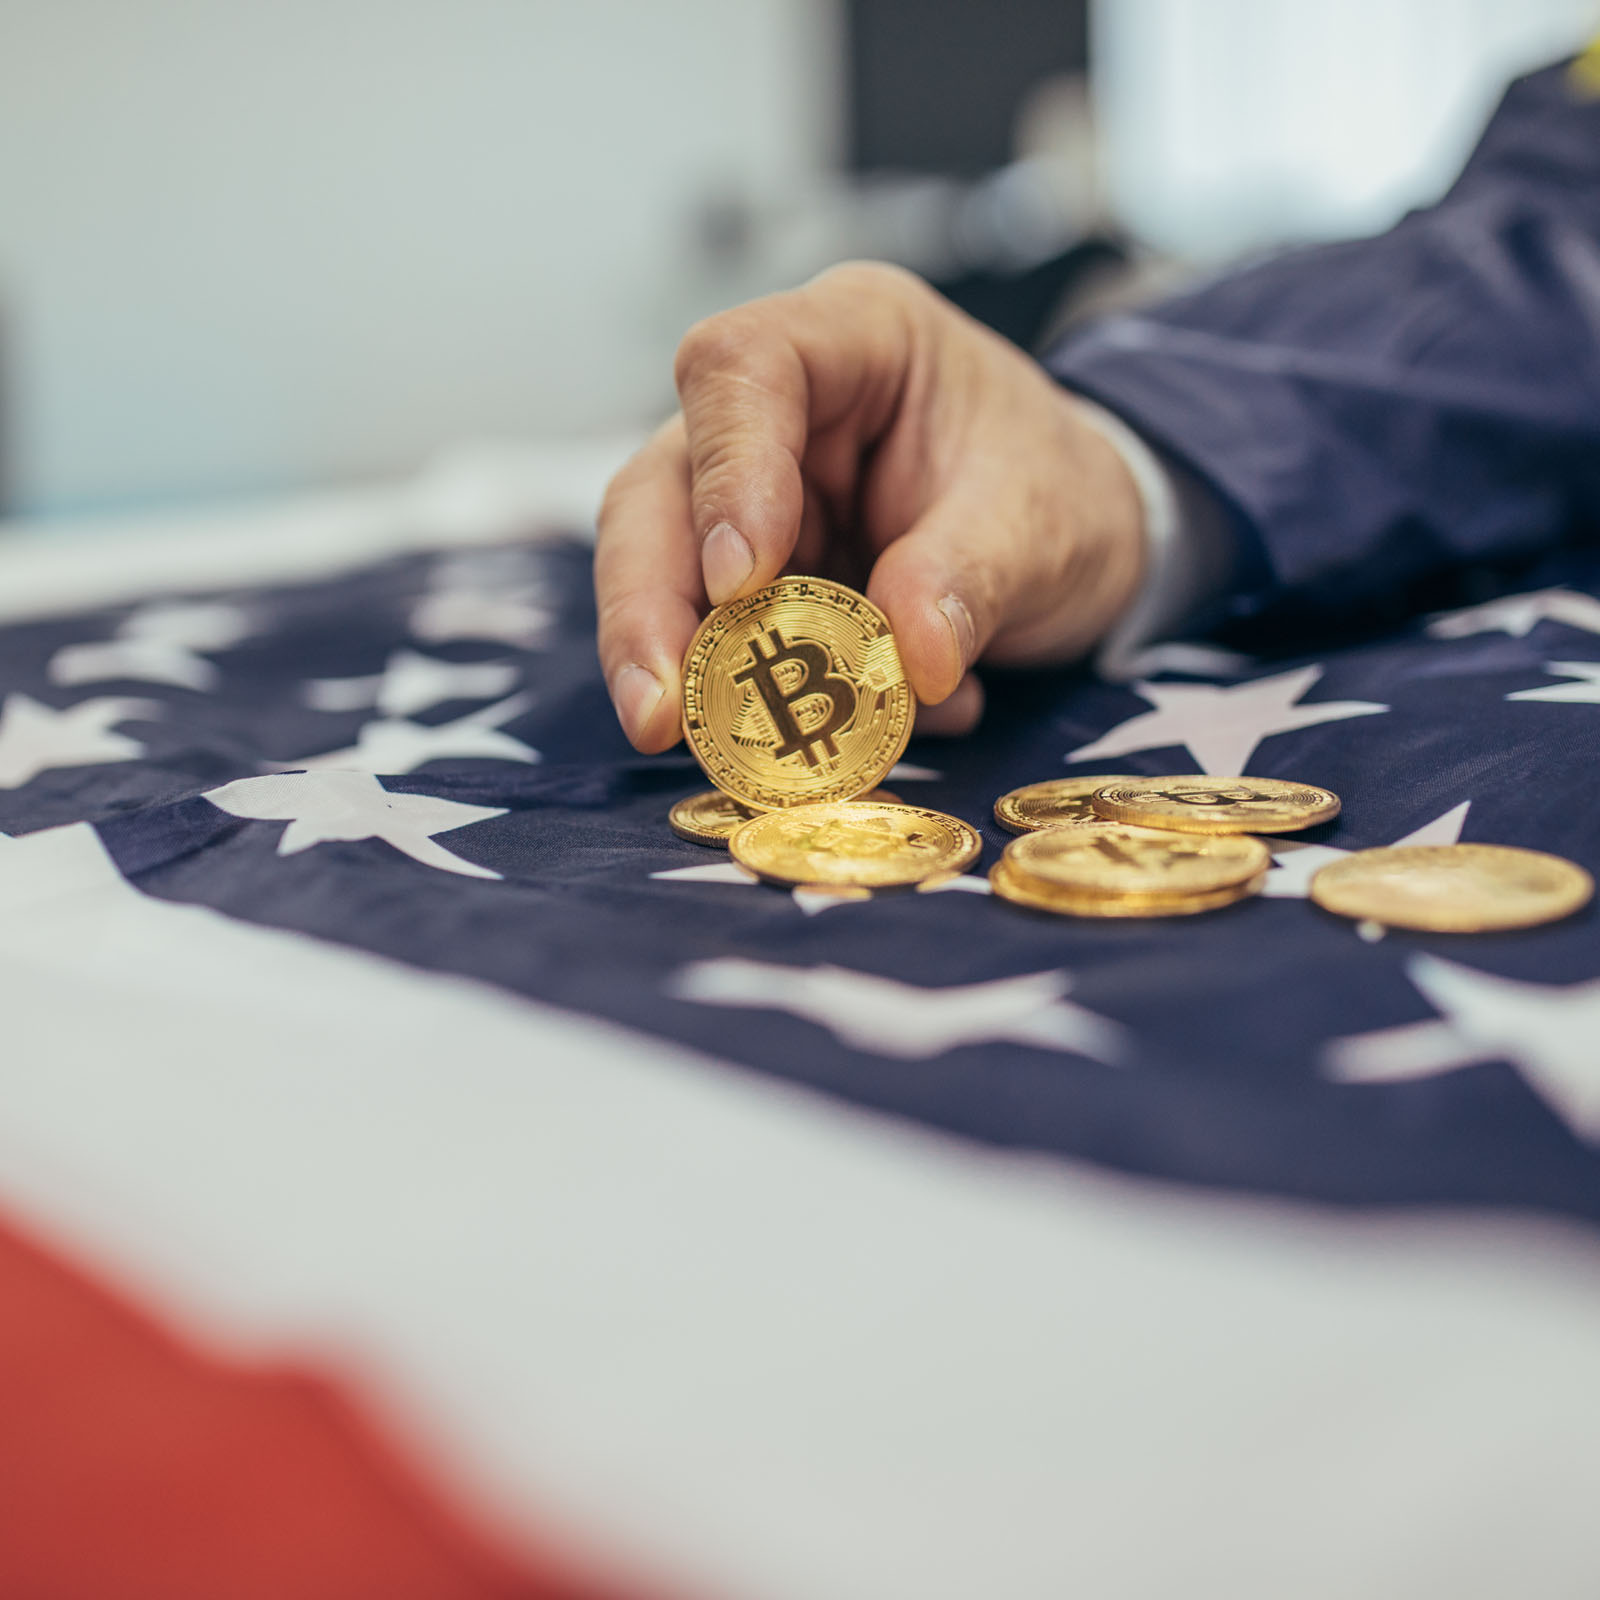 Several States Spearhead Bitcoin Adoption in the U.S.